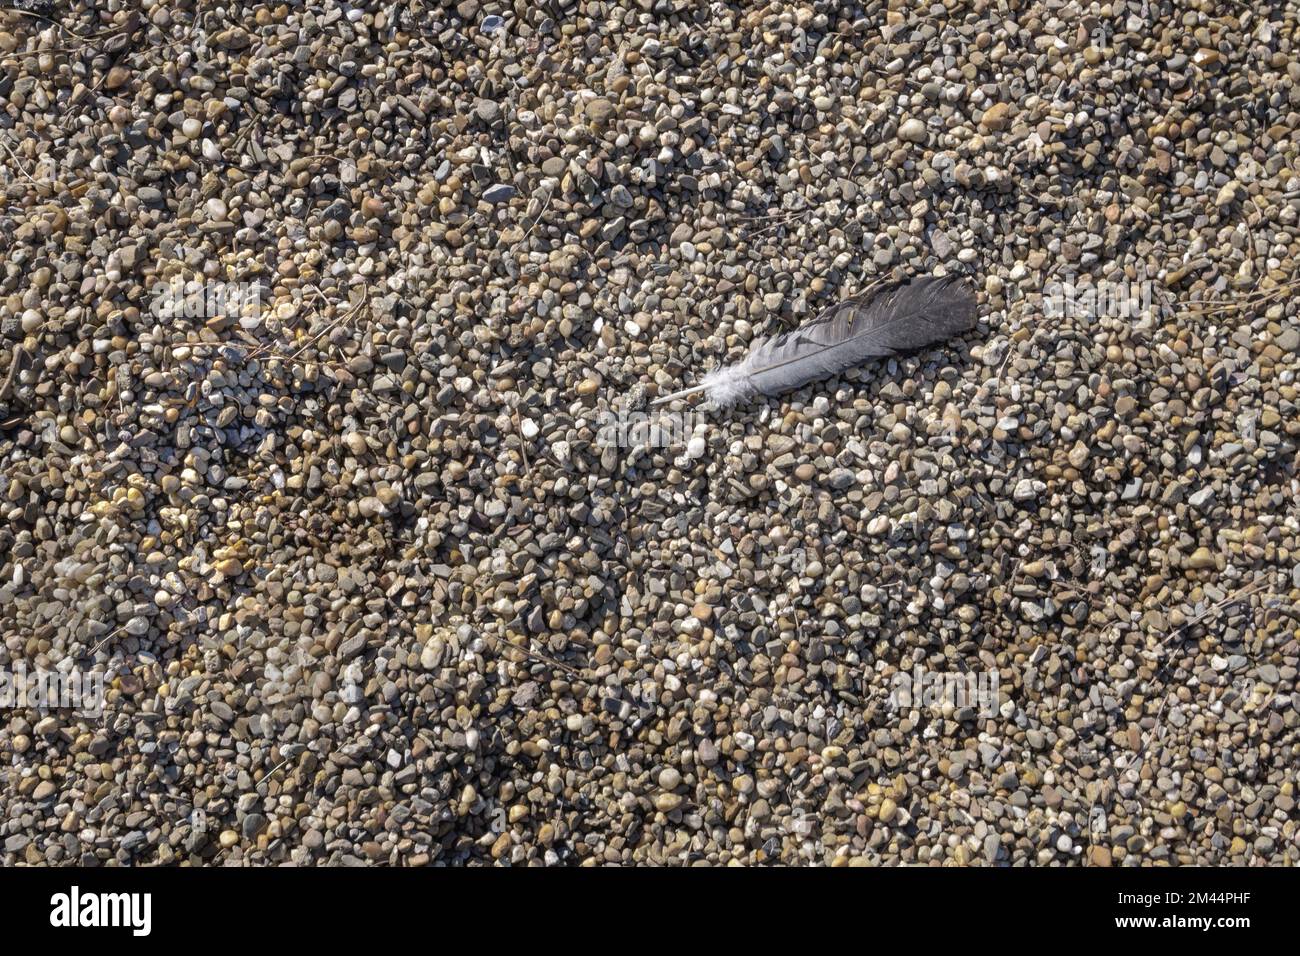 Feather of a bird on fine gravel, close-up Stock Photo